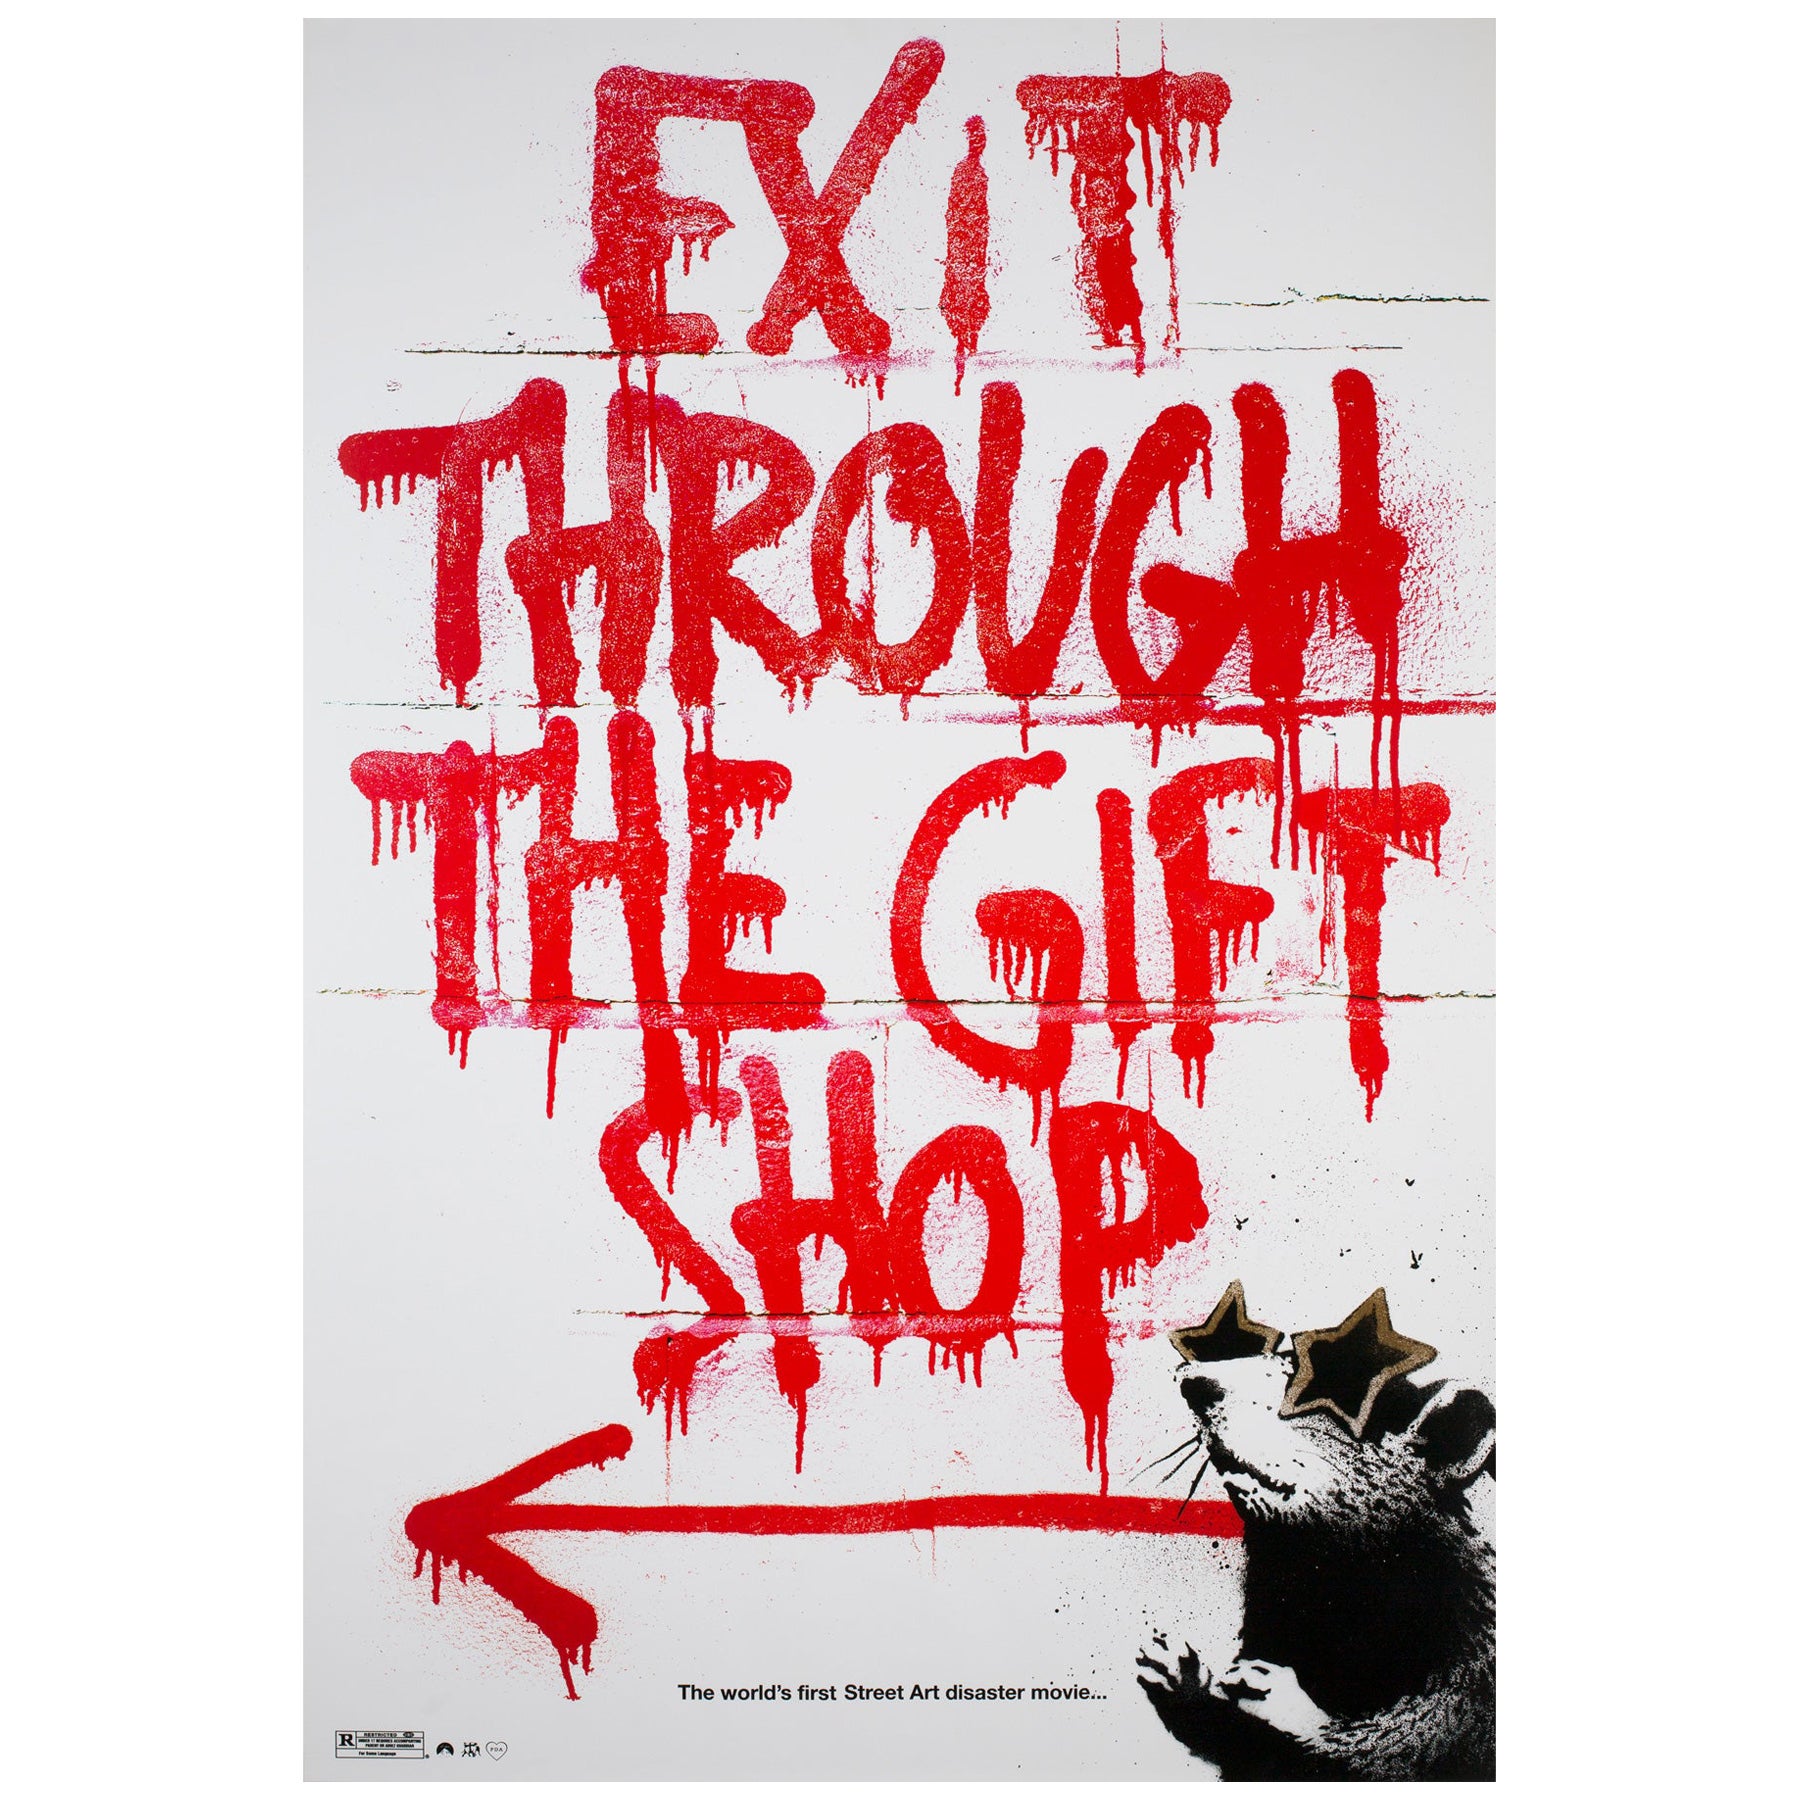 'Exit Through The Gift Shop' 2010 US 1 Sheet Film Poster, Banksy For Sale